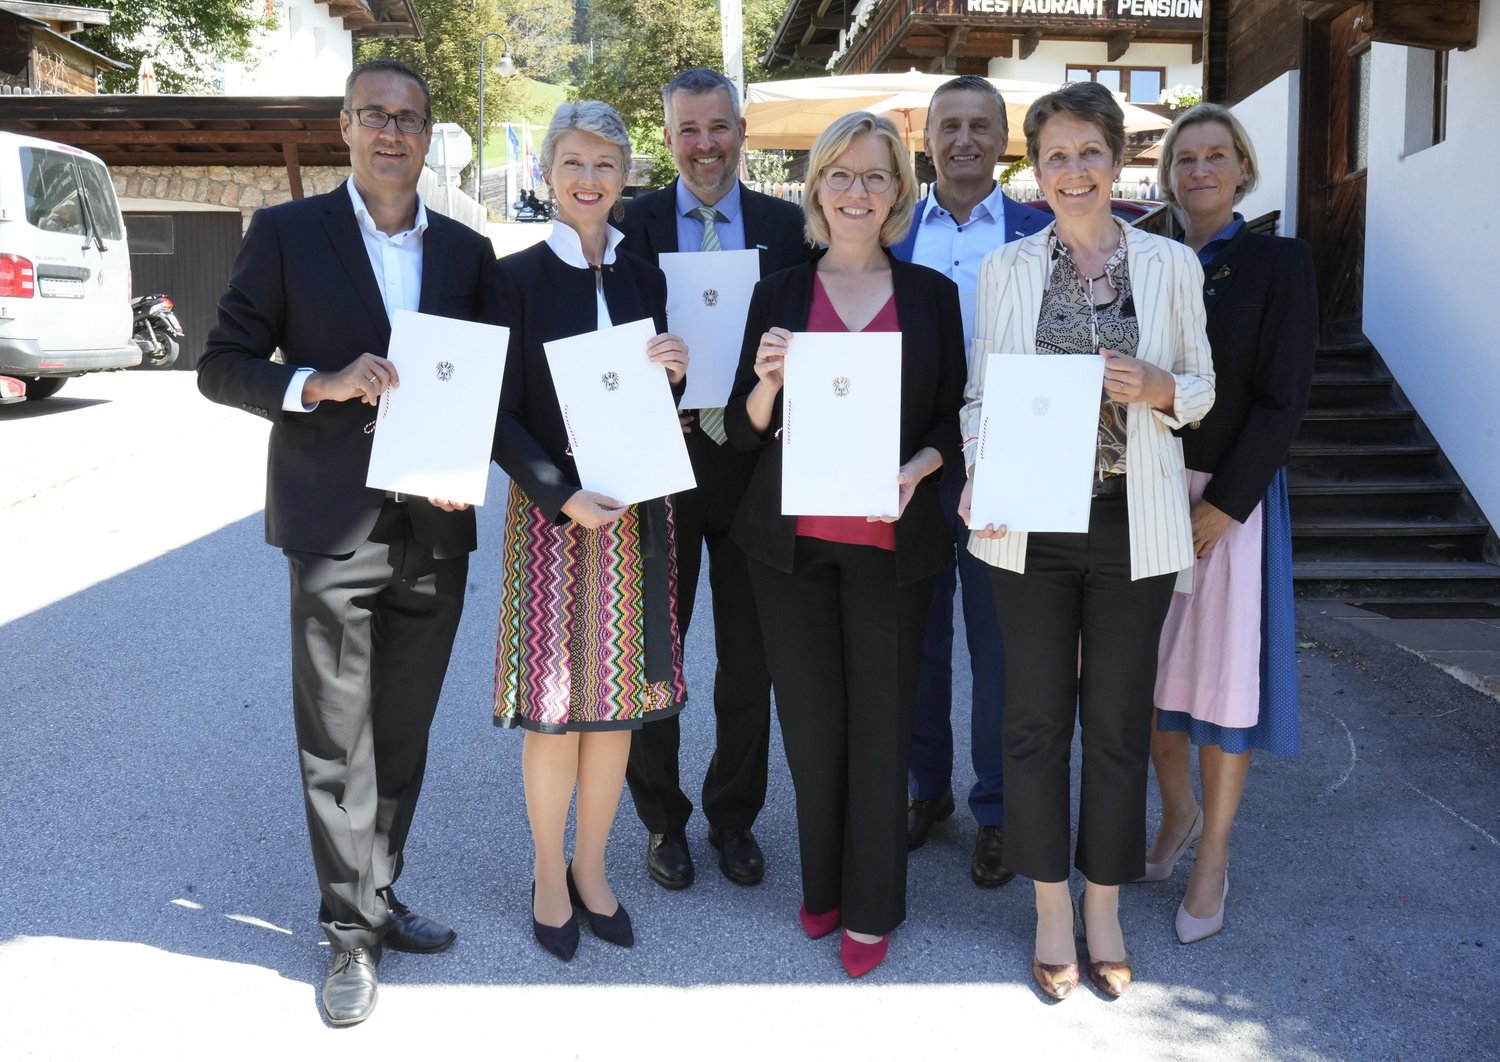 Christoph Ludwig, Gaby Schaunig, Gerald Murauer, Leonore Gewessler, Wilfried Enzenhofer, Sabine Herlitschka and Marion Mitsch, standing side by side with a declaration of continued support for the center of excellence until 2030 in their hands